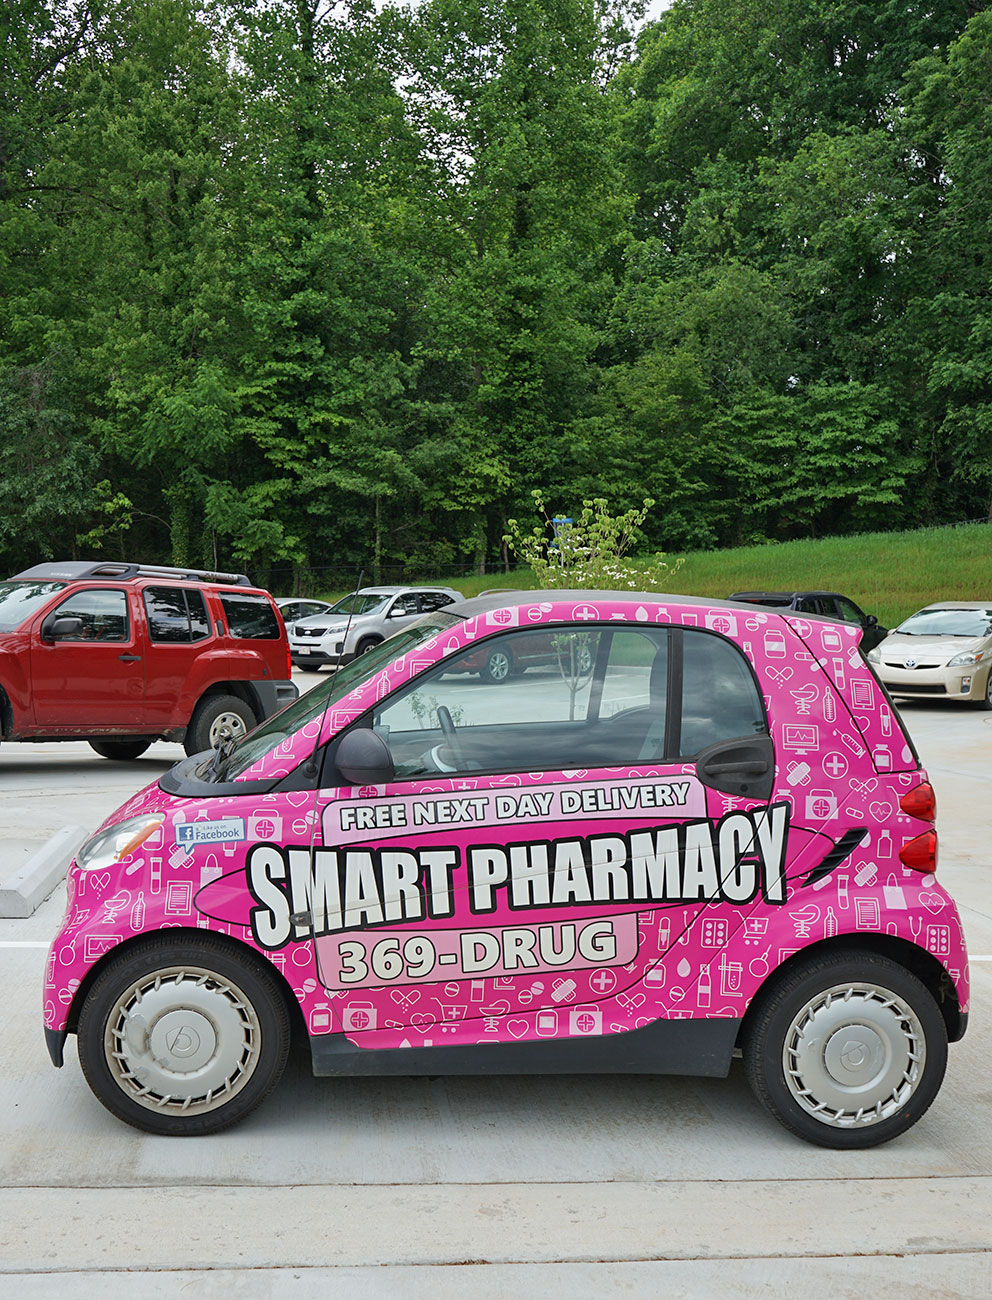 Smart Pharmacy Franklin NC Locally Owned